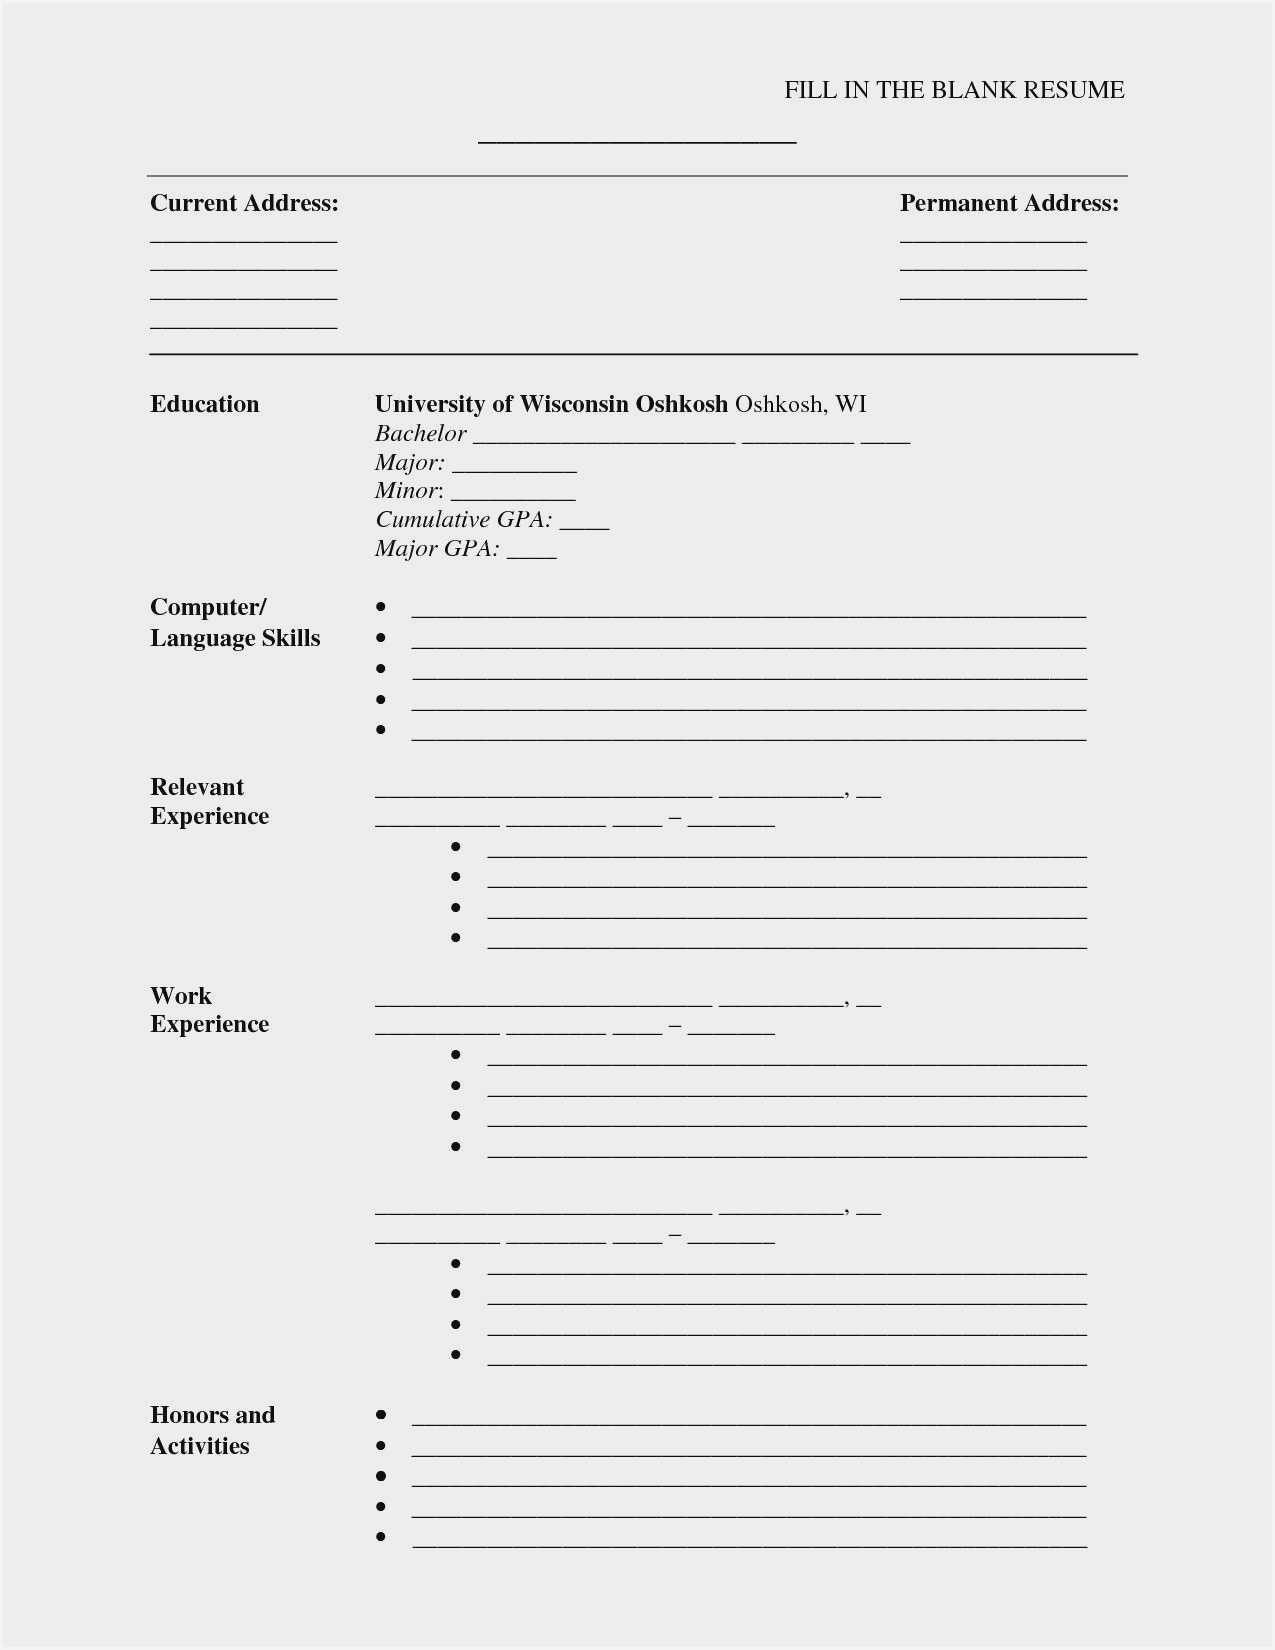 Blank Cv Format Word Download - Resume : Resume Sample #3945 With Regard To Free Blank Resume Templates For Microsoft Word